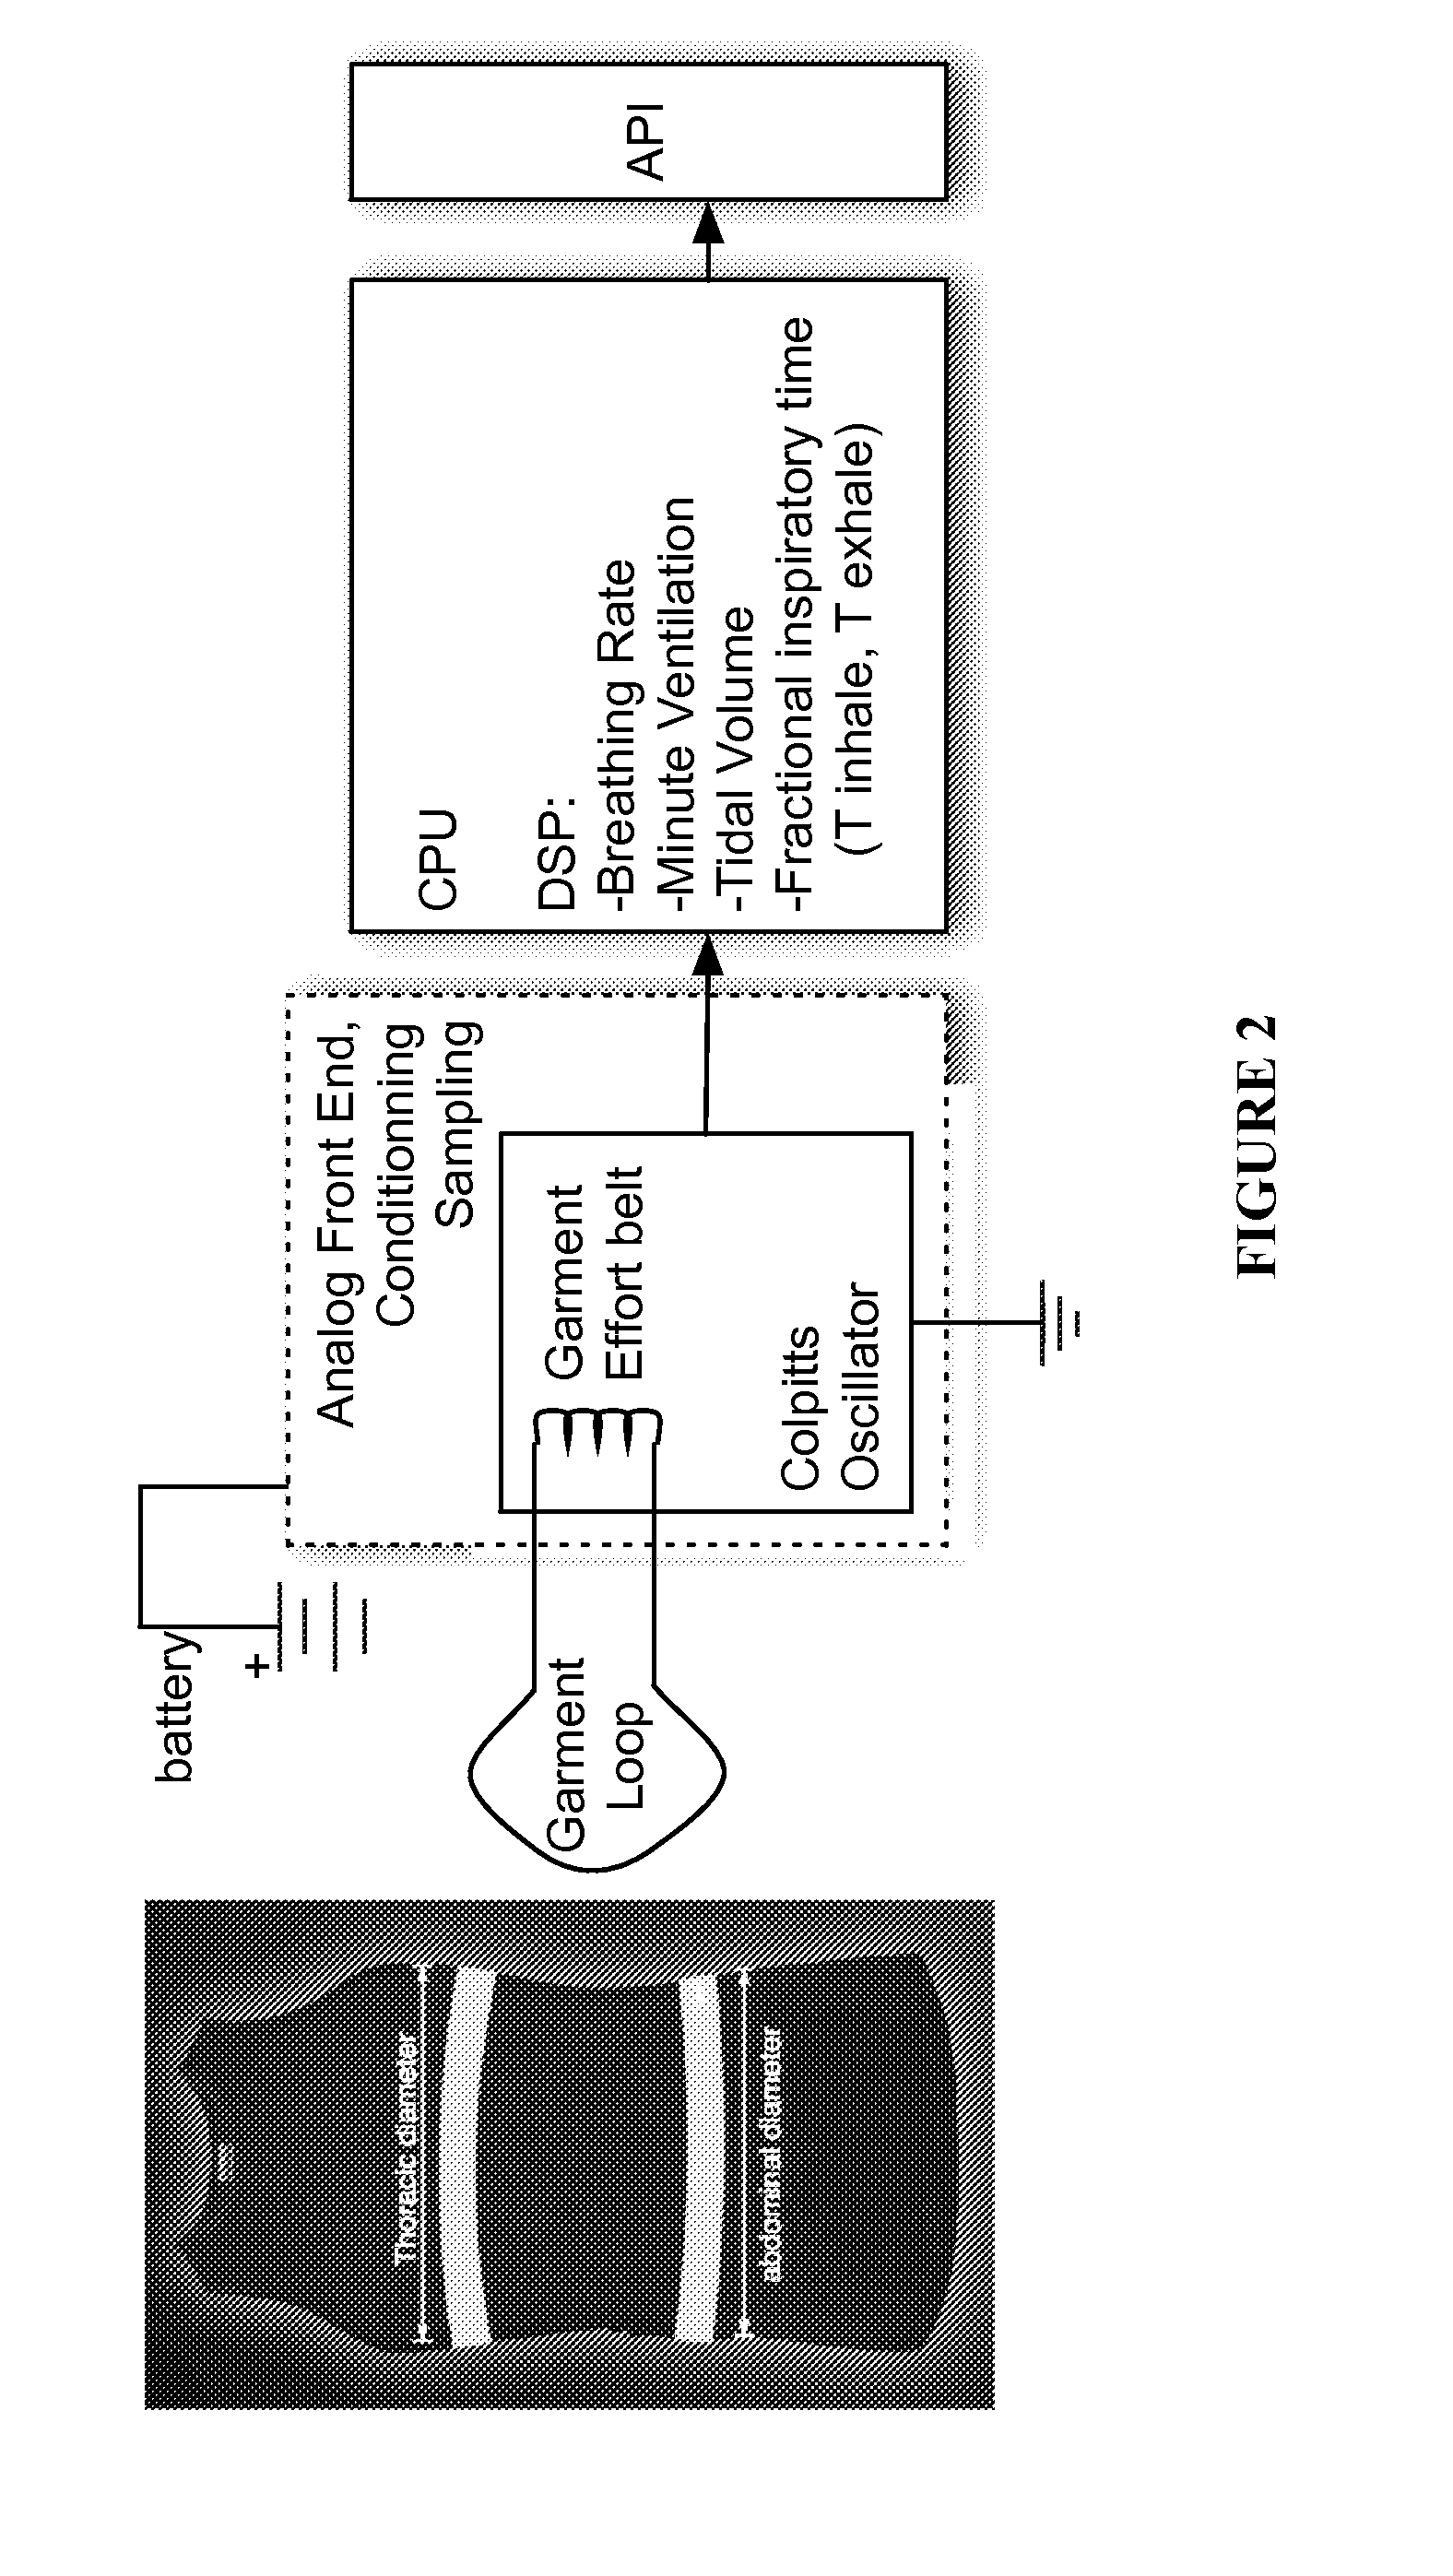 Wearable respiratory inductance plethysmography device and method for respiratory activity analysis